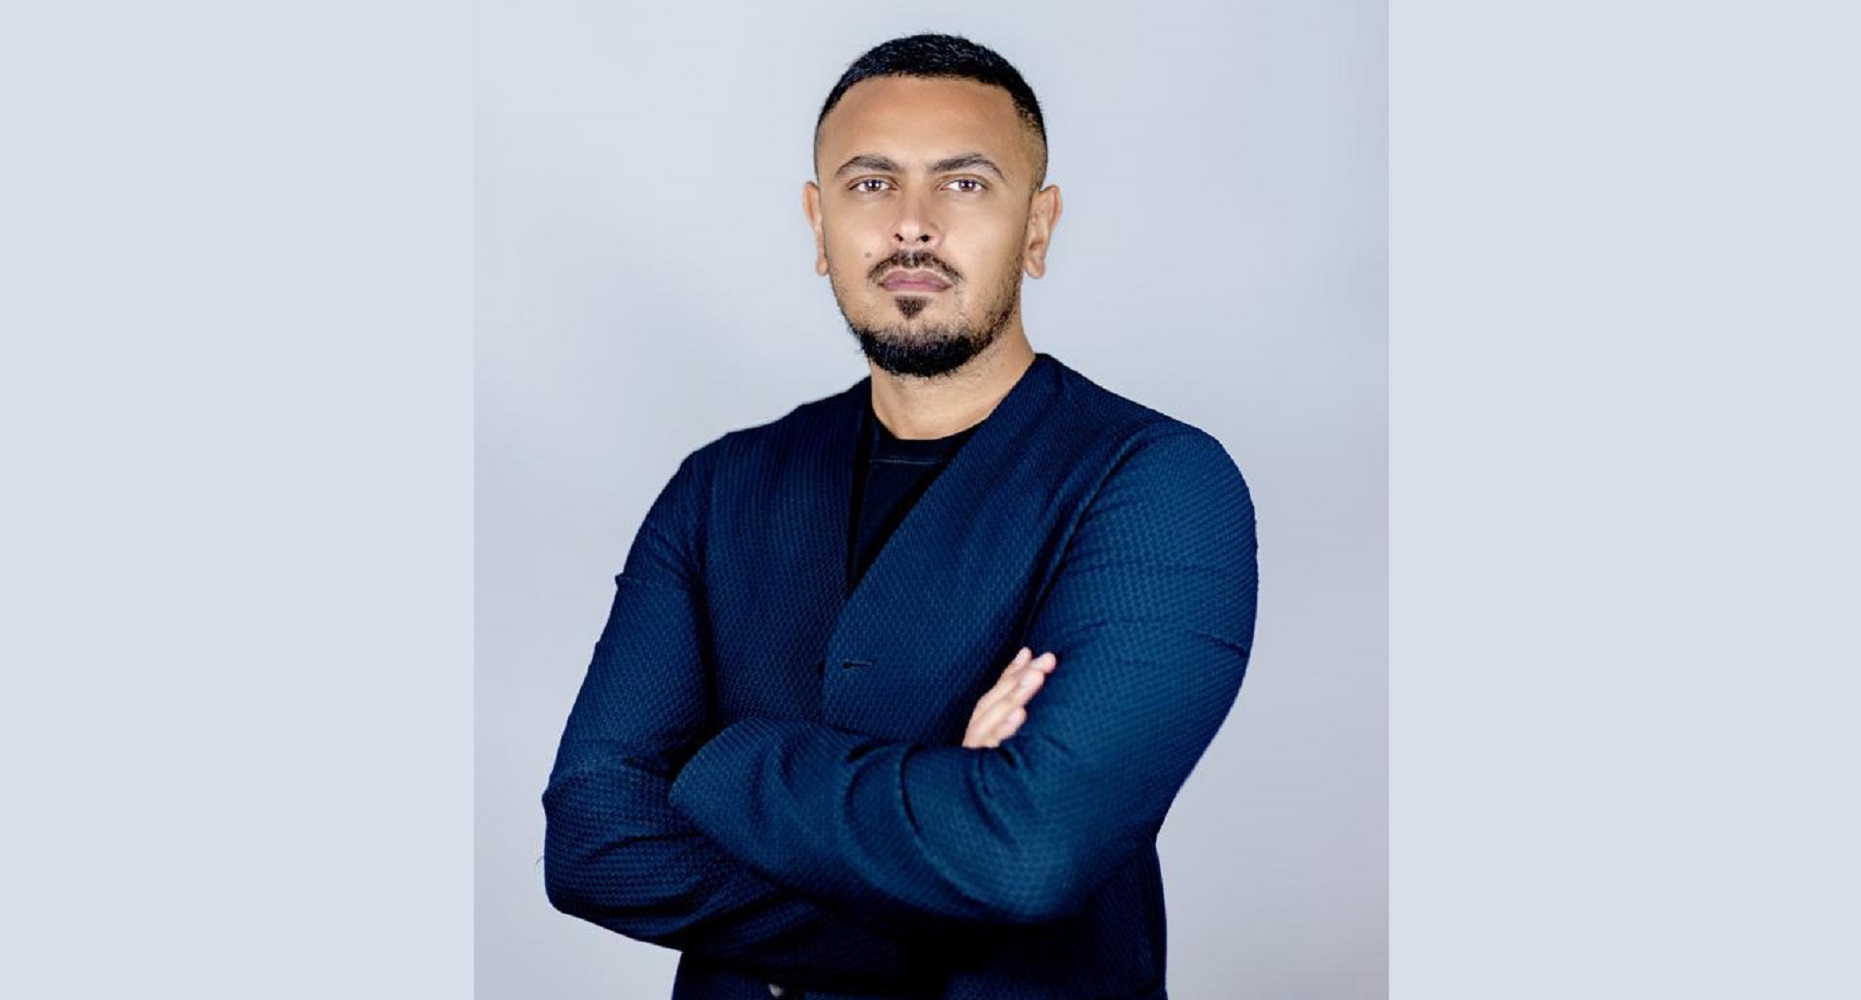 UM MENAT Appoints Toseef Butt as Regional Director - Performance and Retail Media